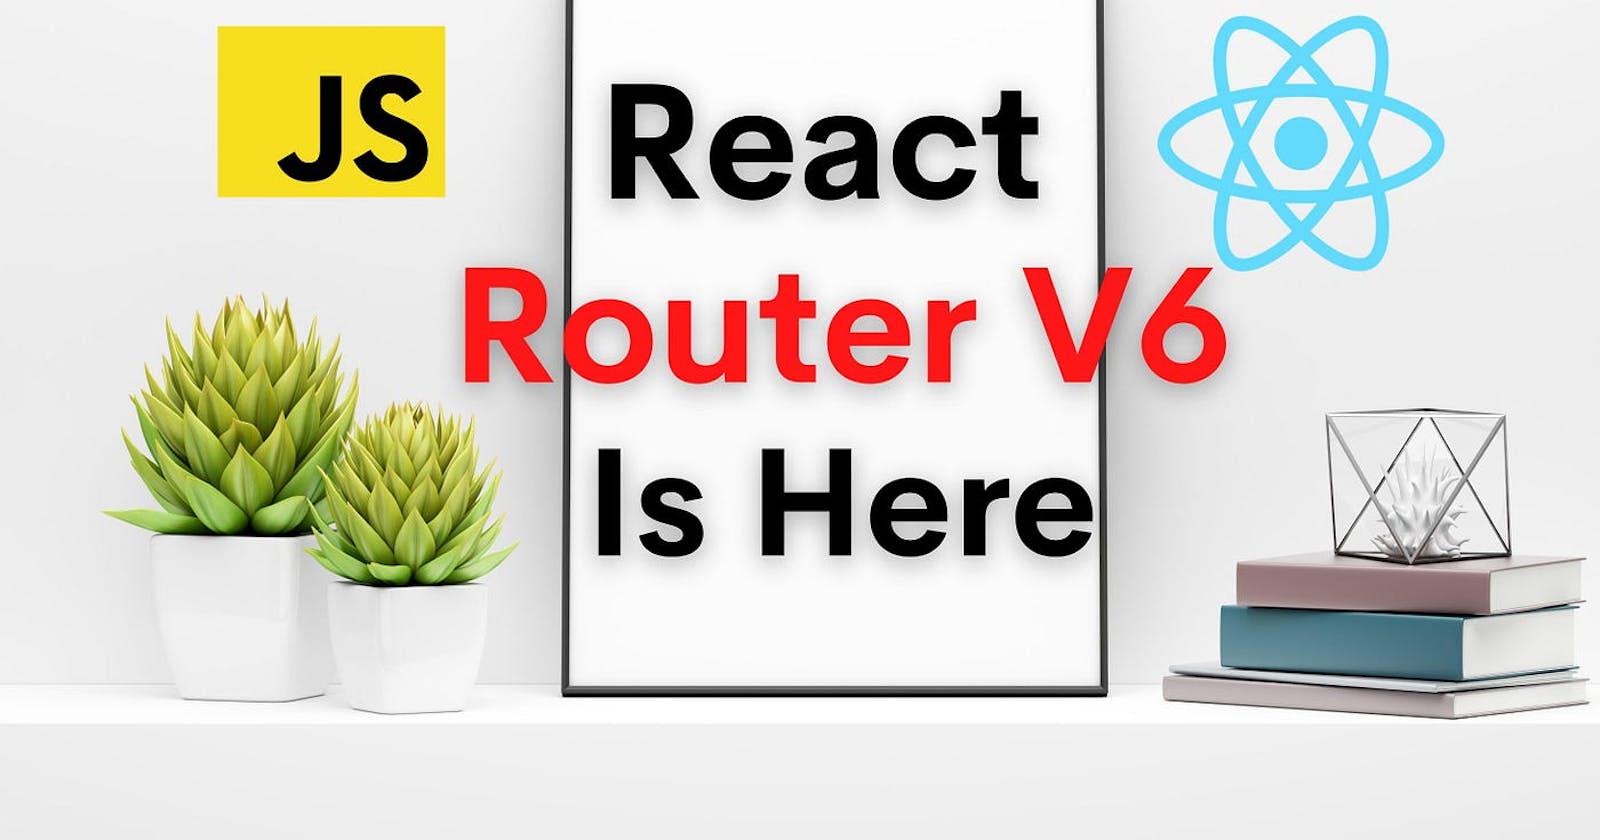 React-Router-Dom v6